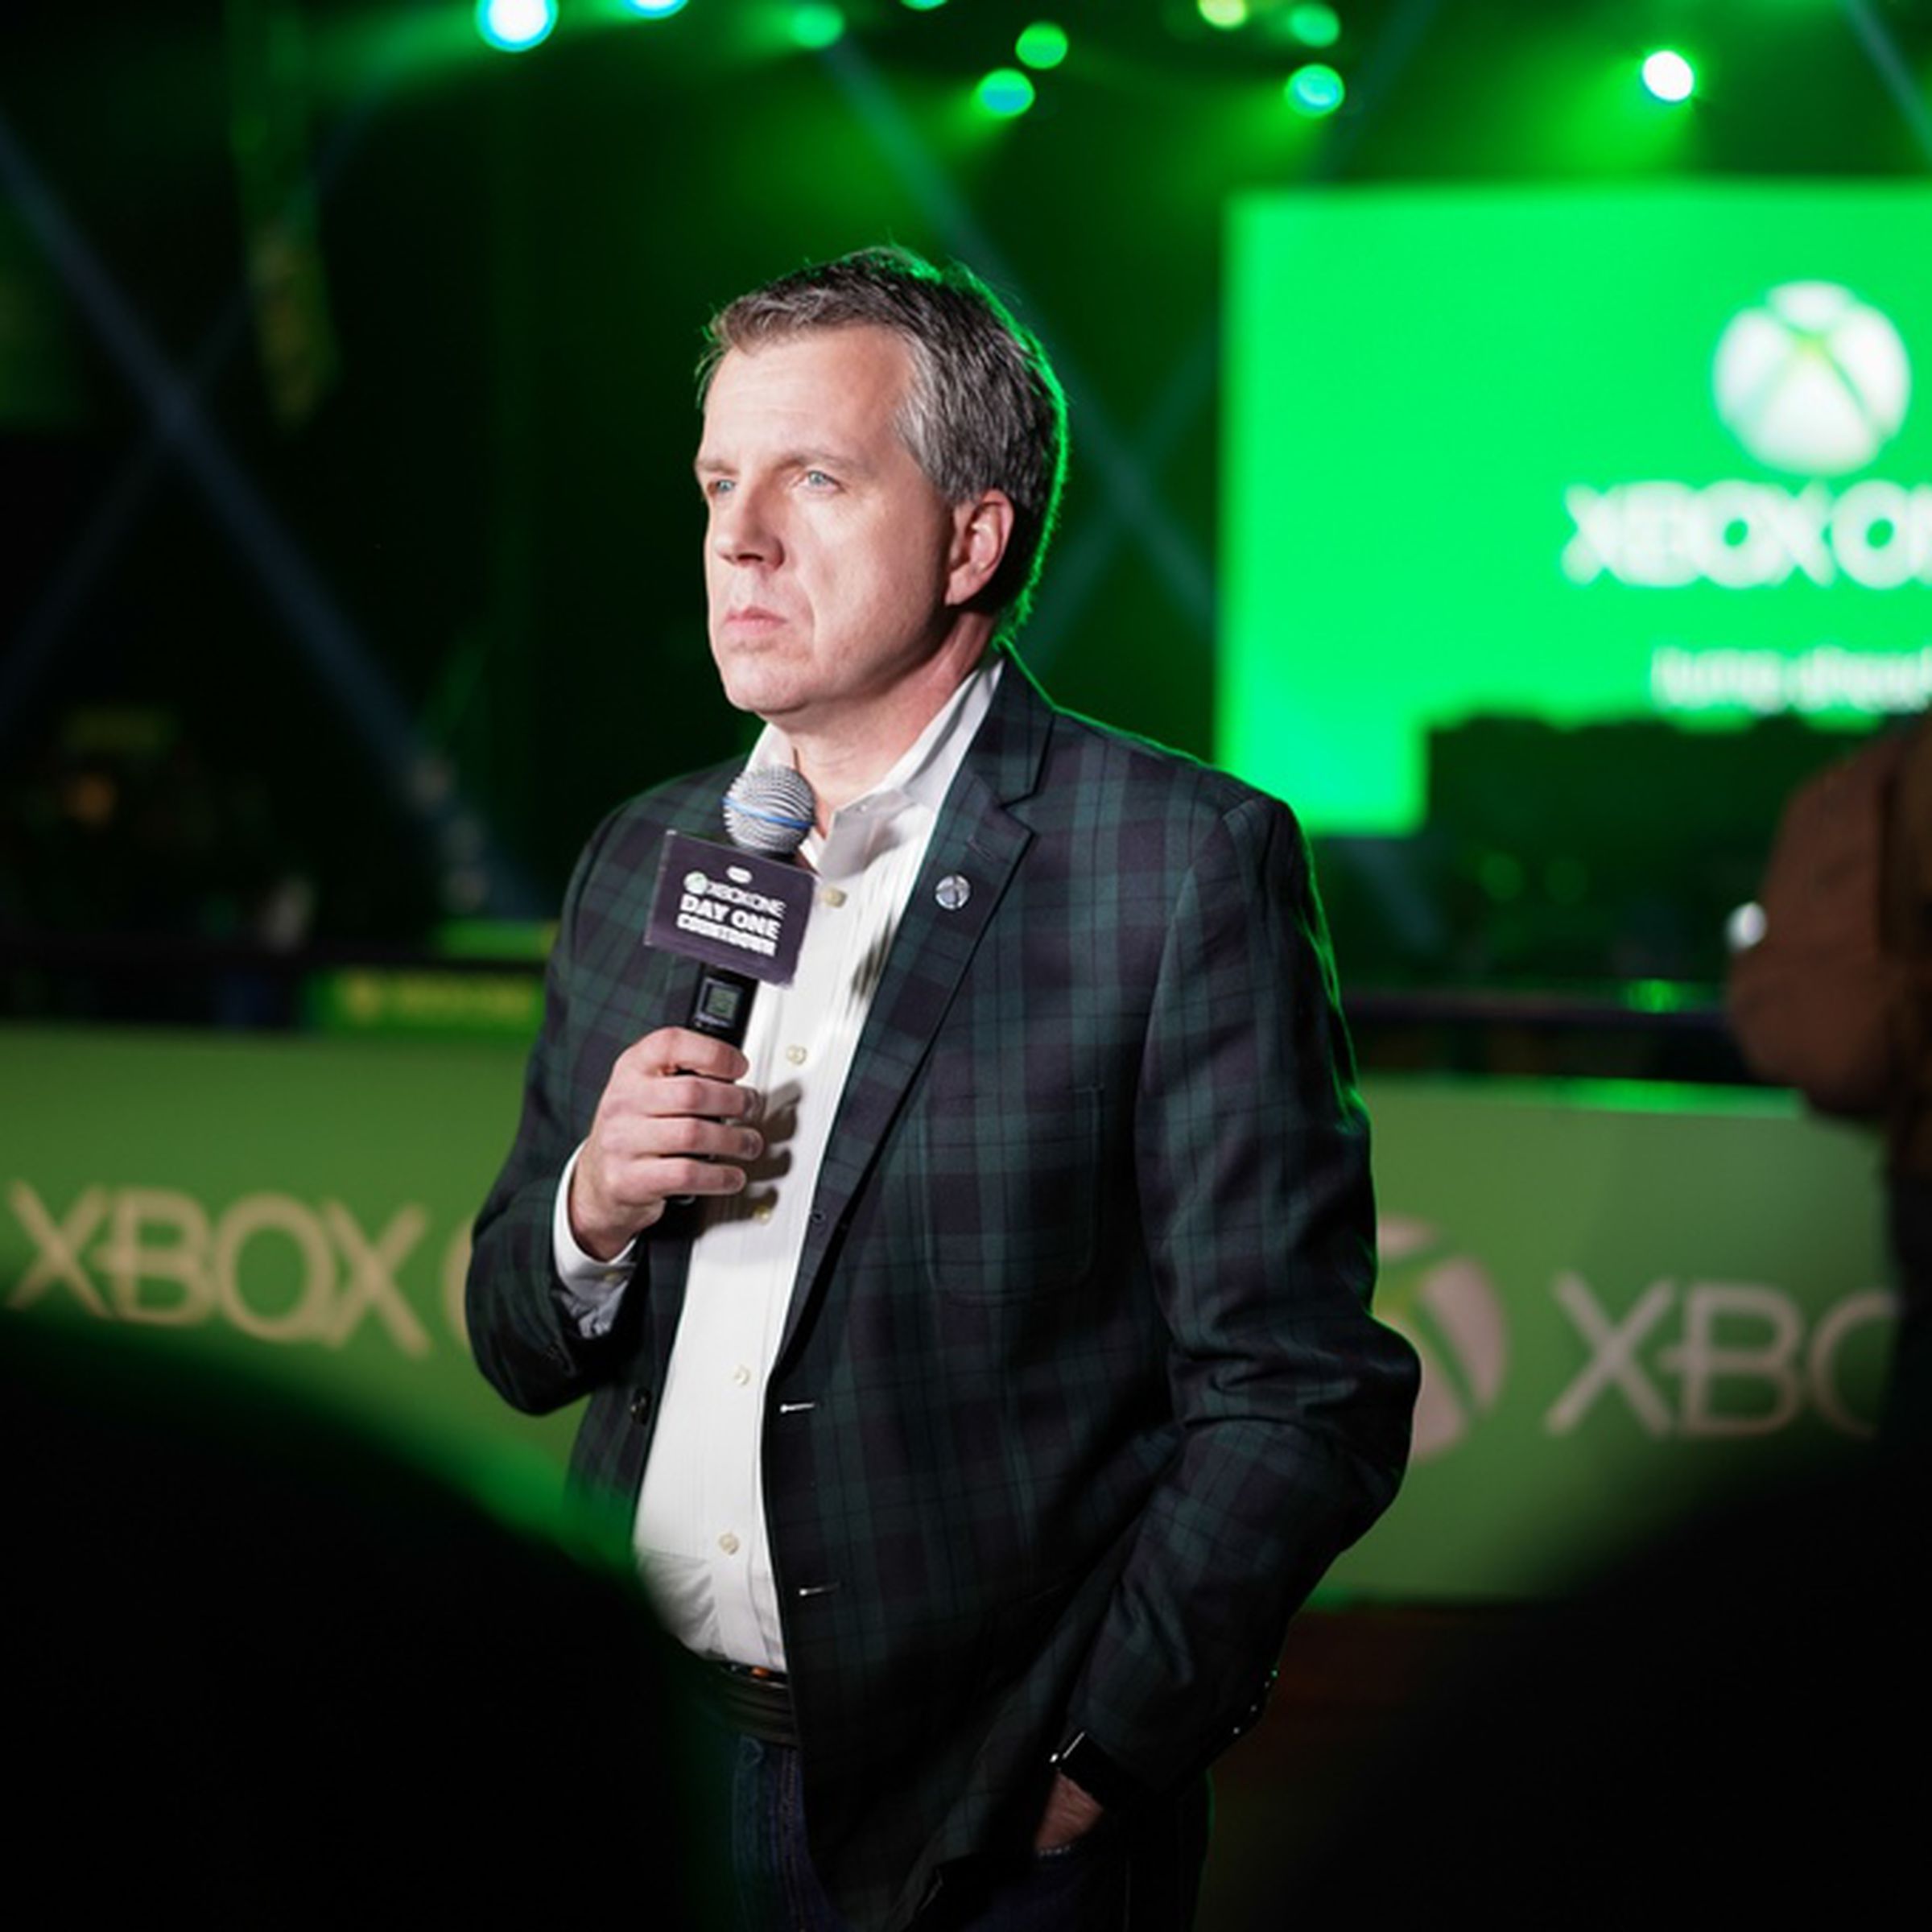 Xbox One launch party photos